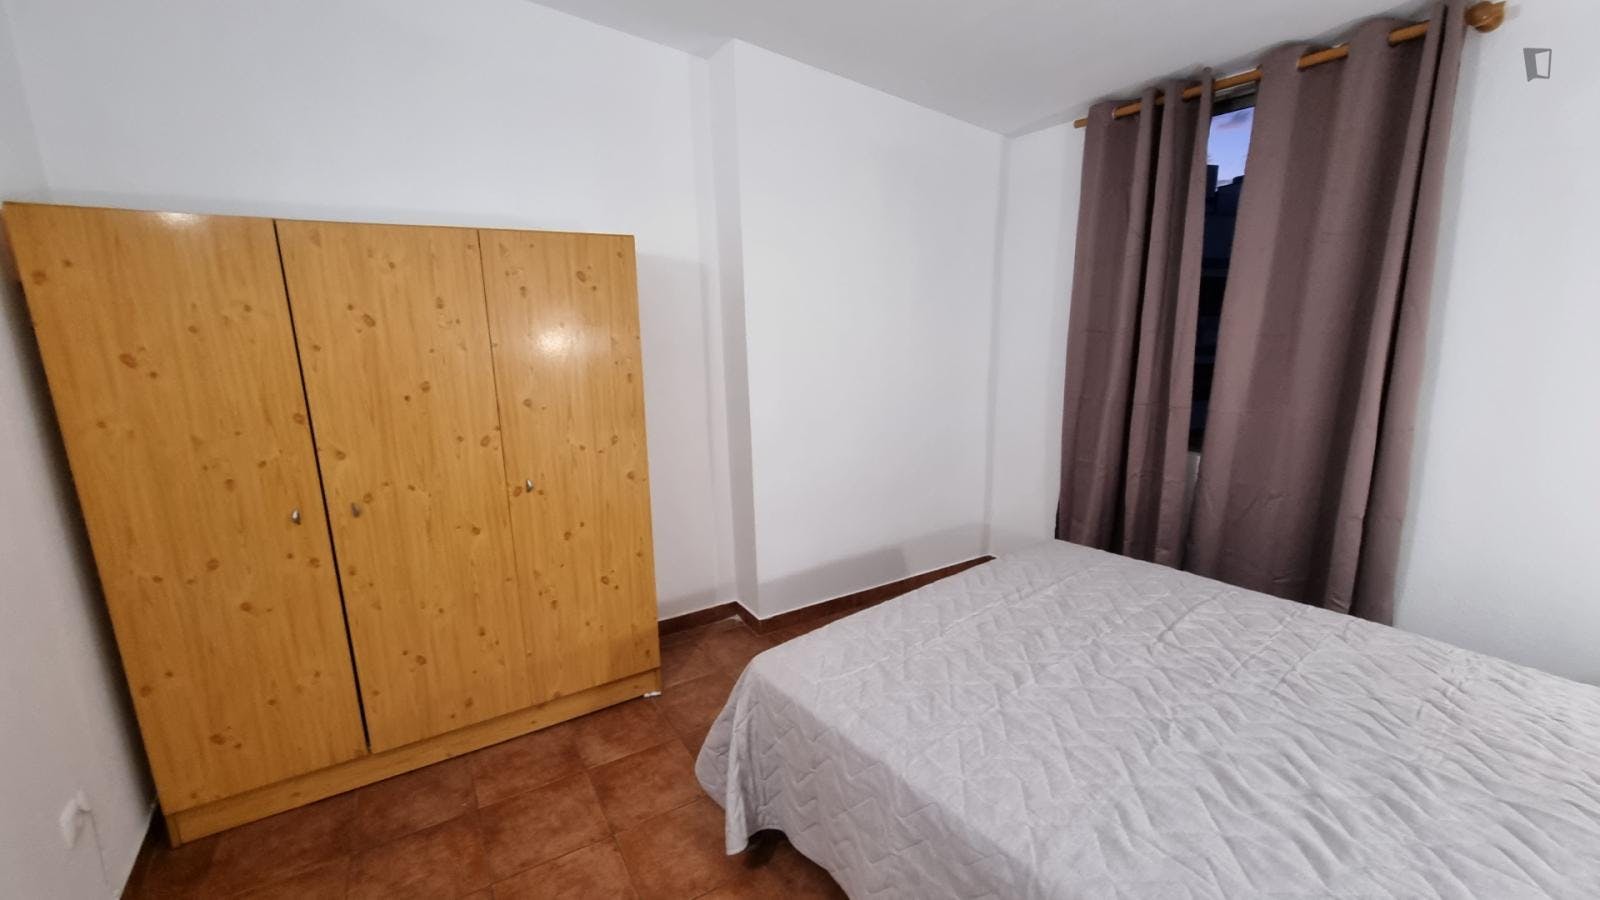 Inviting 1-bedroom apartment in Funchal city centre